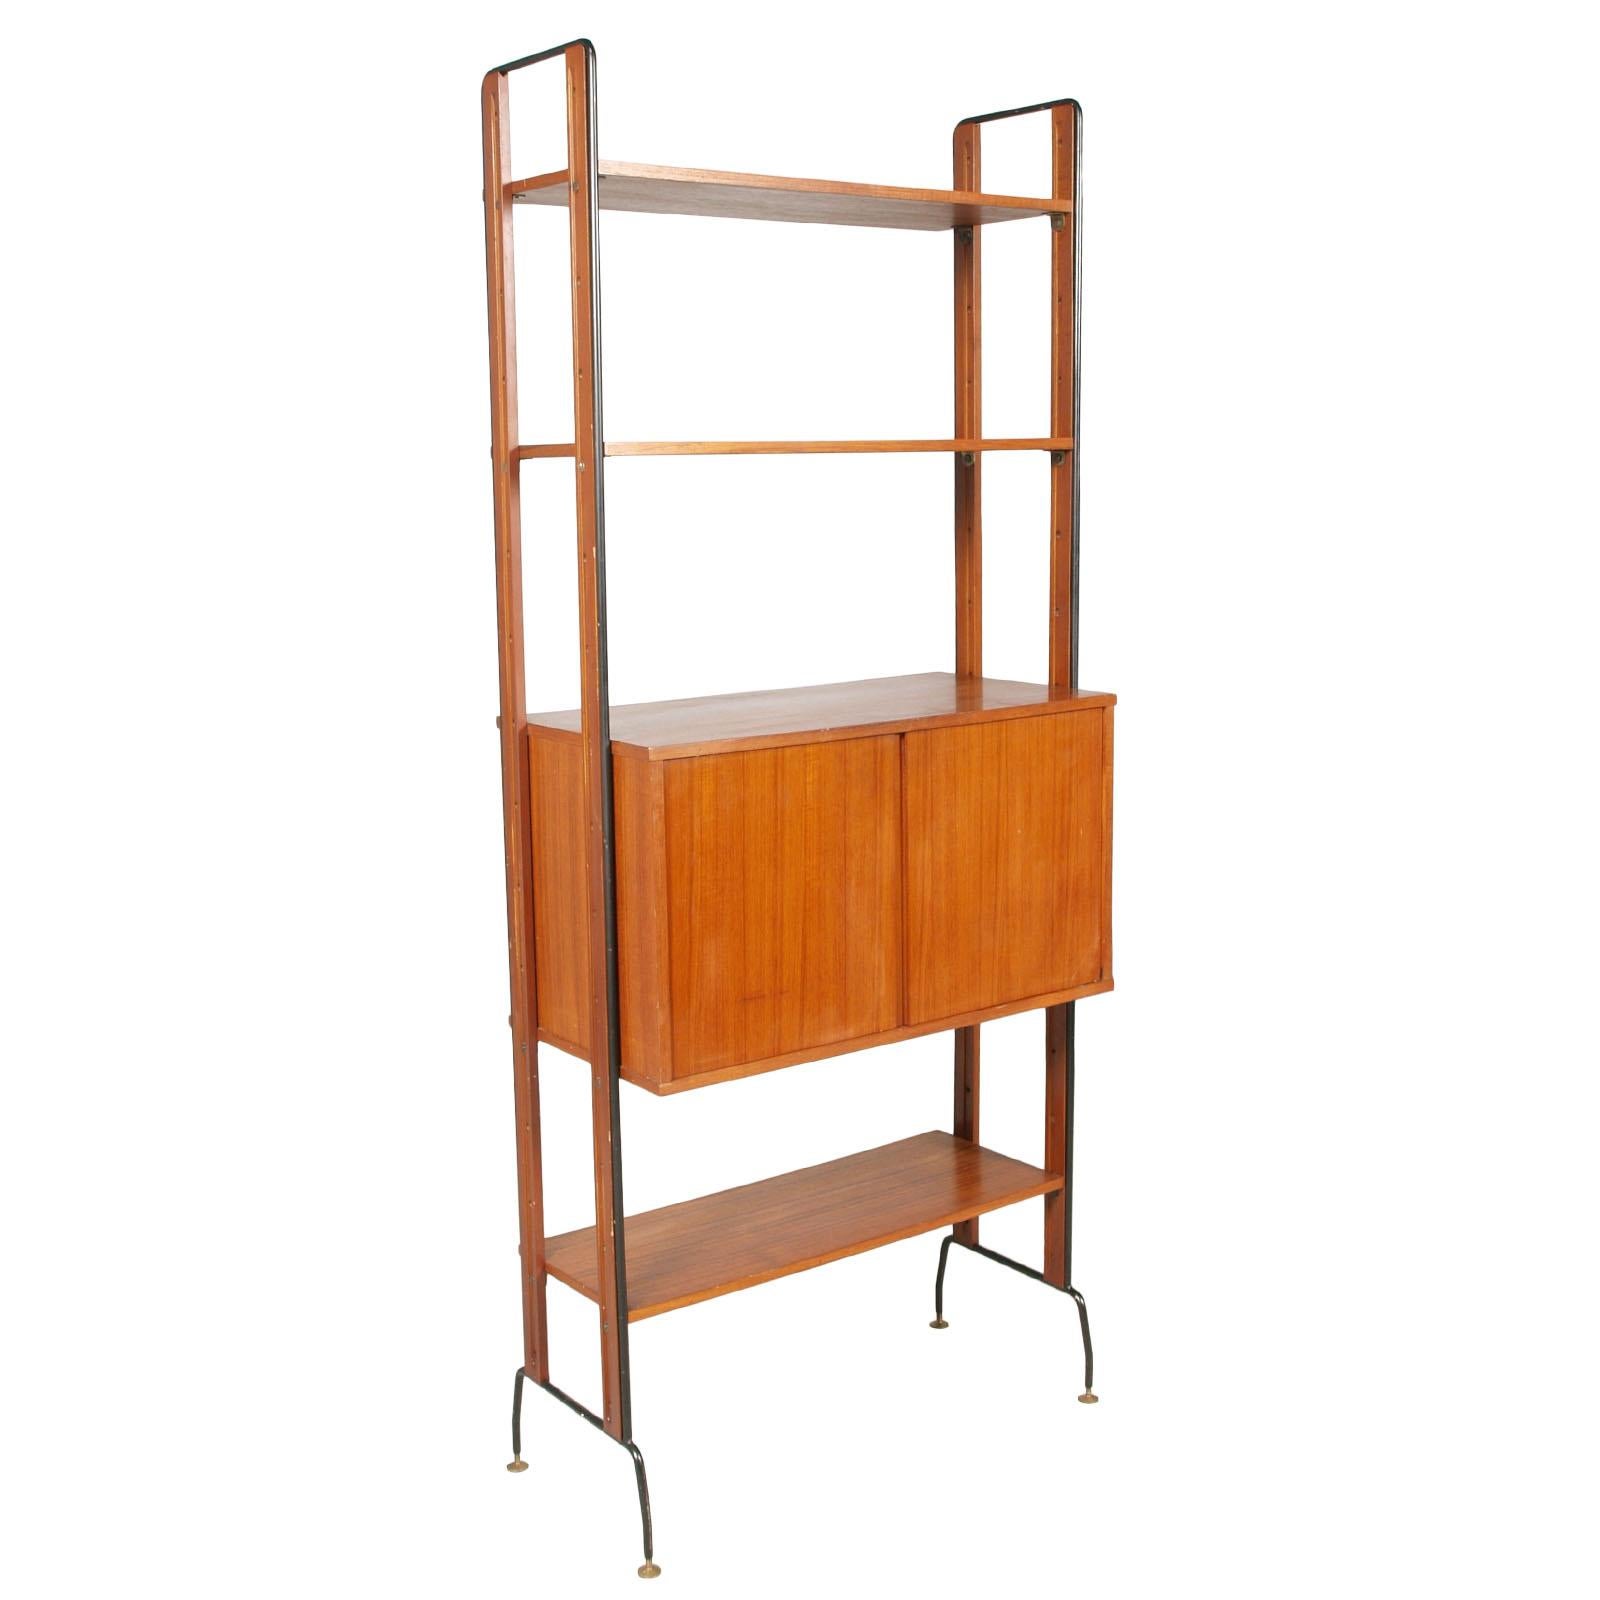 1950s number two modules book shelfs with two storage units, La Permanente Mobili di Cantu, Franco Albini Franca Helg manner in solid teak wood, teak wood veneer of storage cabinets and structure in black lacquered steel. Adjustable brass feet and